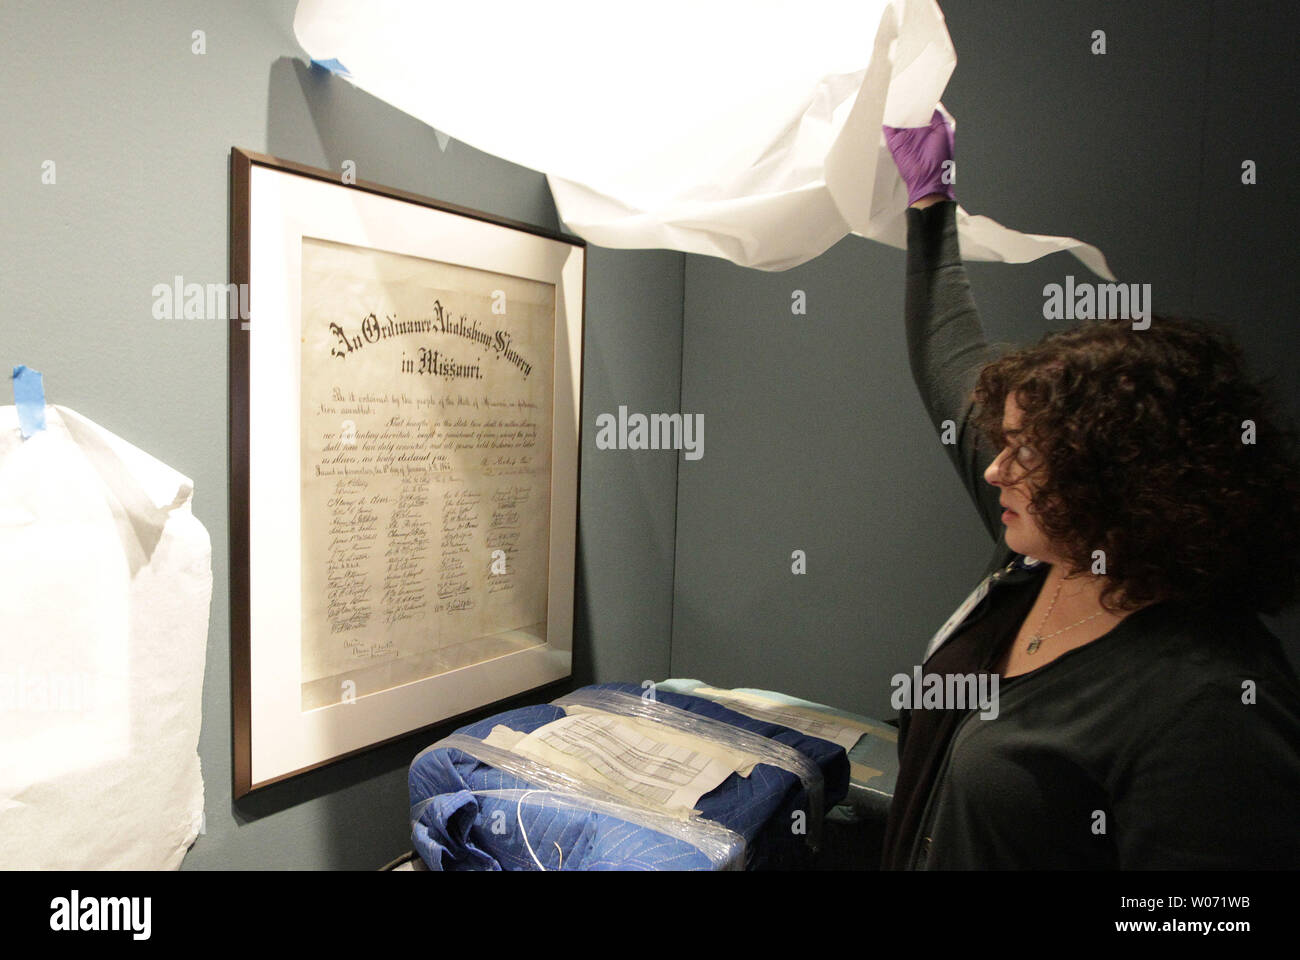 Amy Berra, Registrar at the Missouri History Museum uncovers a document that abolishes slavery in Missouri from the Civil War era as the 'Civil War in Missouri,' display continues to set up at the Museum in St. Louis on November 8, 2011. To commemorate the sesquicentennial of the Civil War the Missouri History MuseumÕs comprehensive The Civil War in Missouri will feature items from America's bloodiest conflict. UPI/Bill Greenblatt Stock Photo